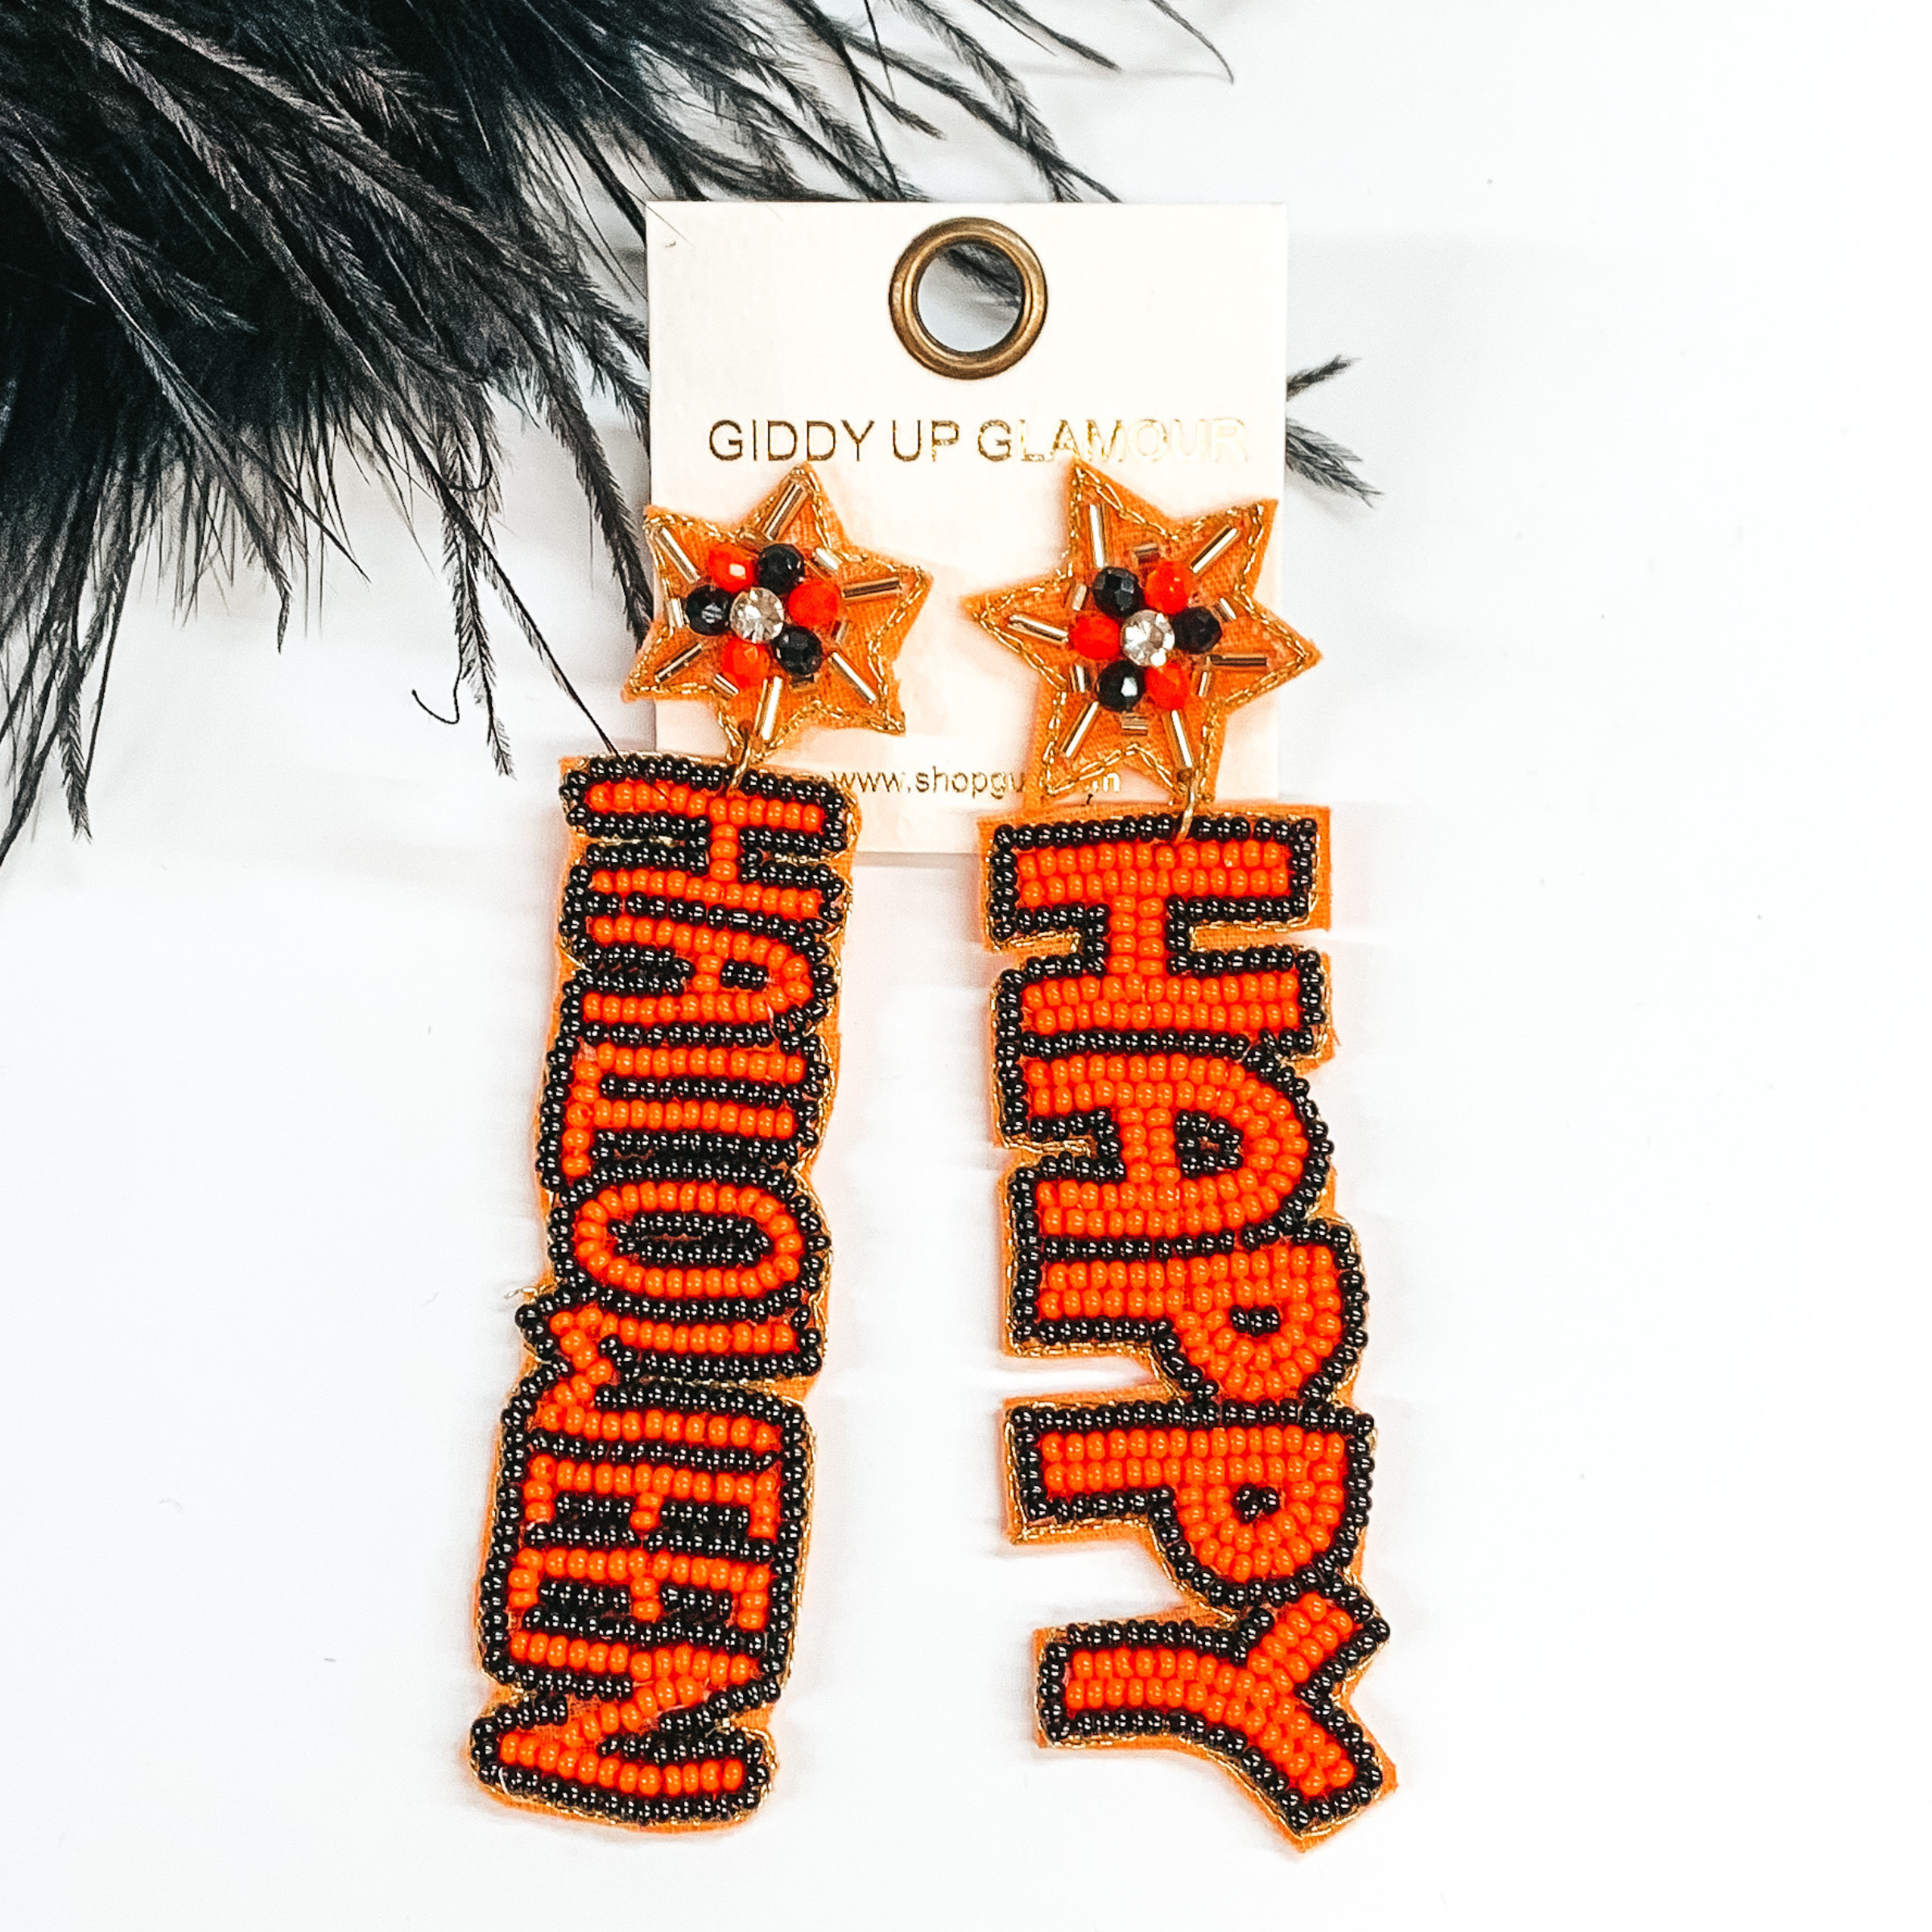 Star shaped post back earrings with  hanging beaded words. The words are "HAPPY" anf "HALLOWEEN" in orange beads with a black beaded outline. These earrings are pictured on a white background with black feathers at the top. 